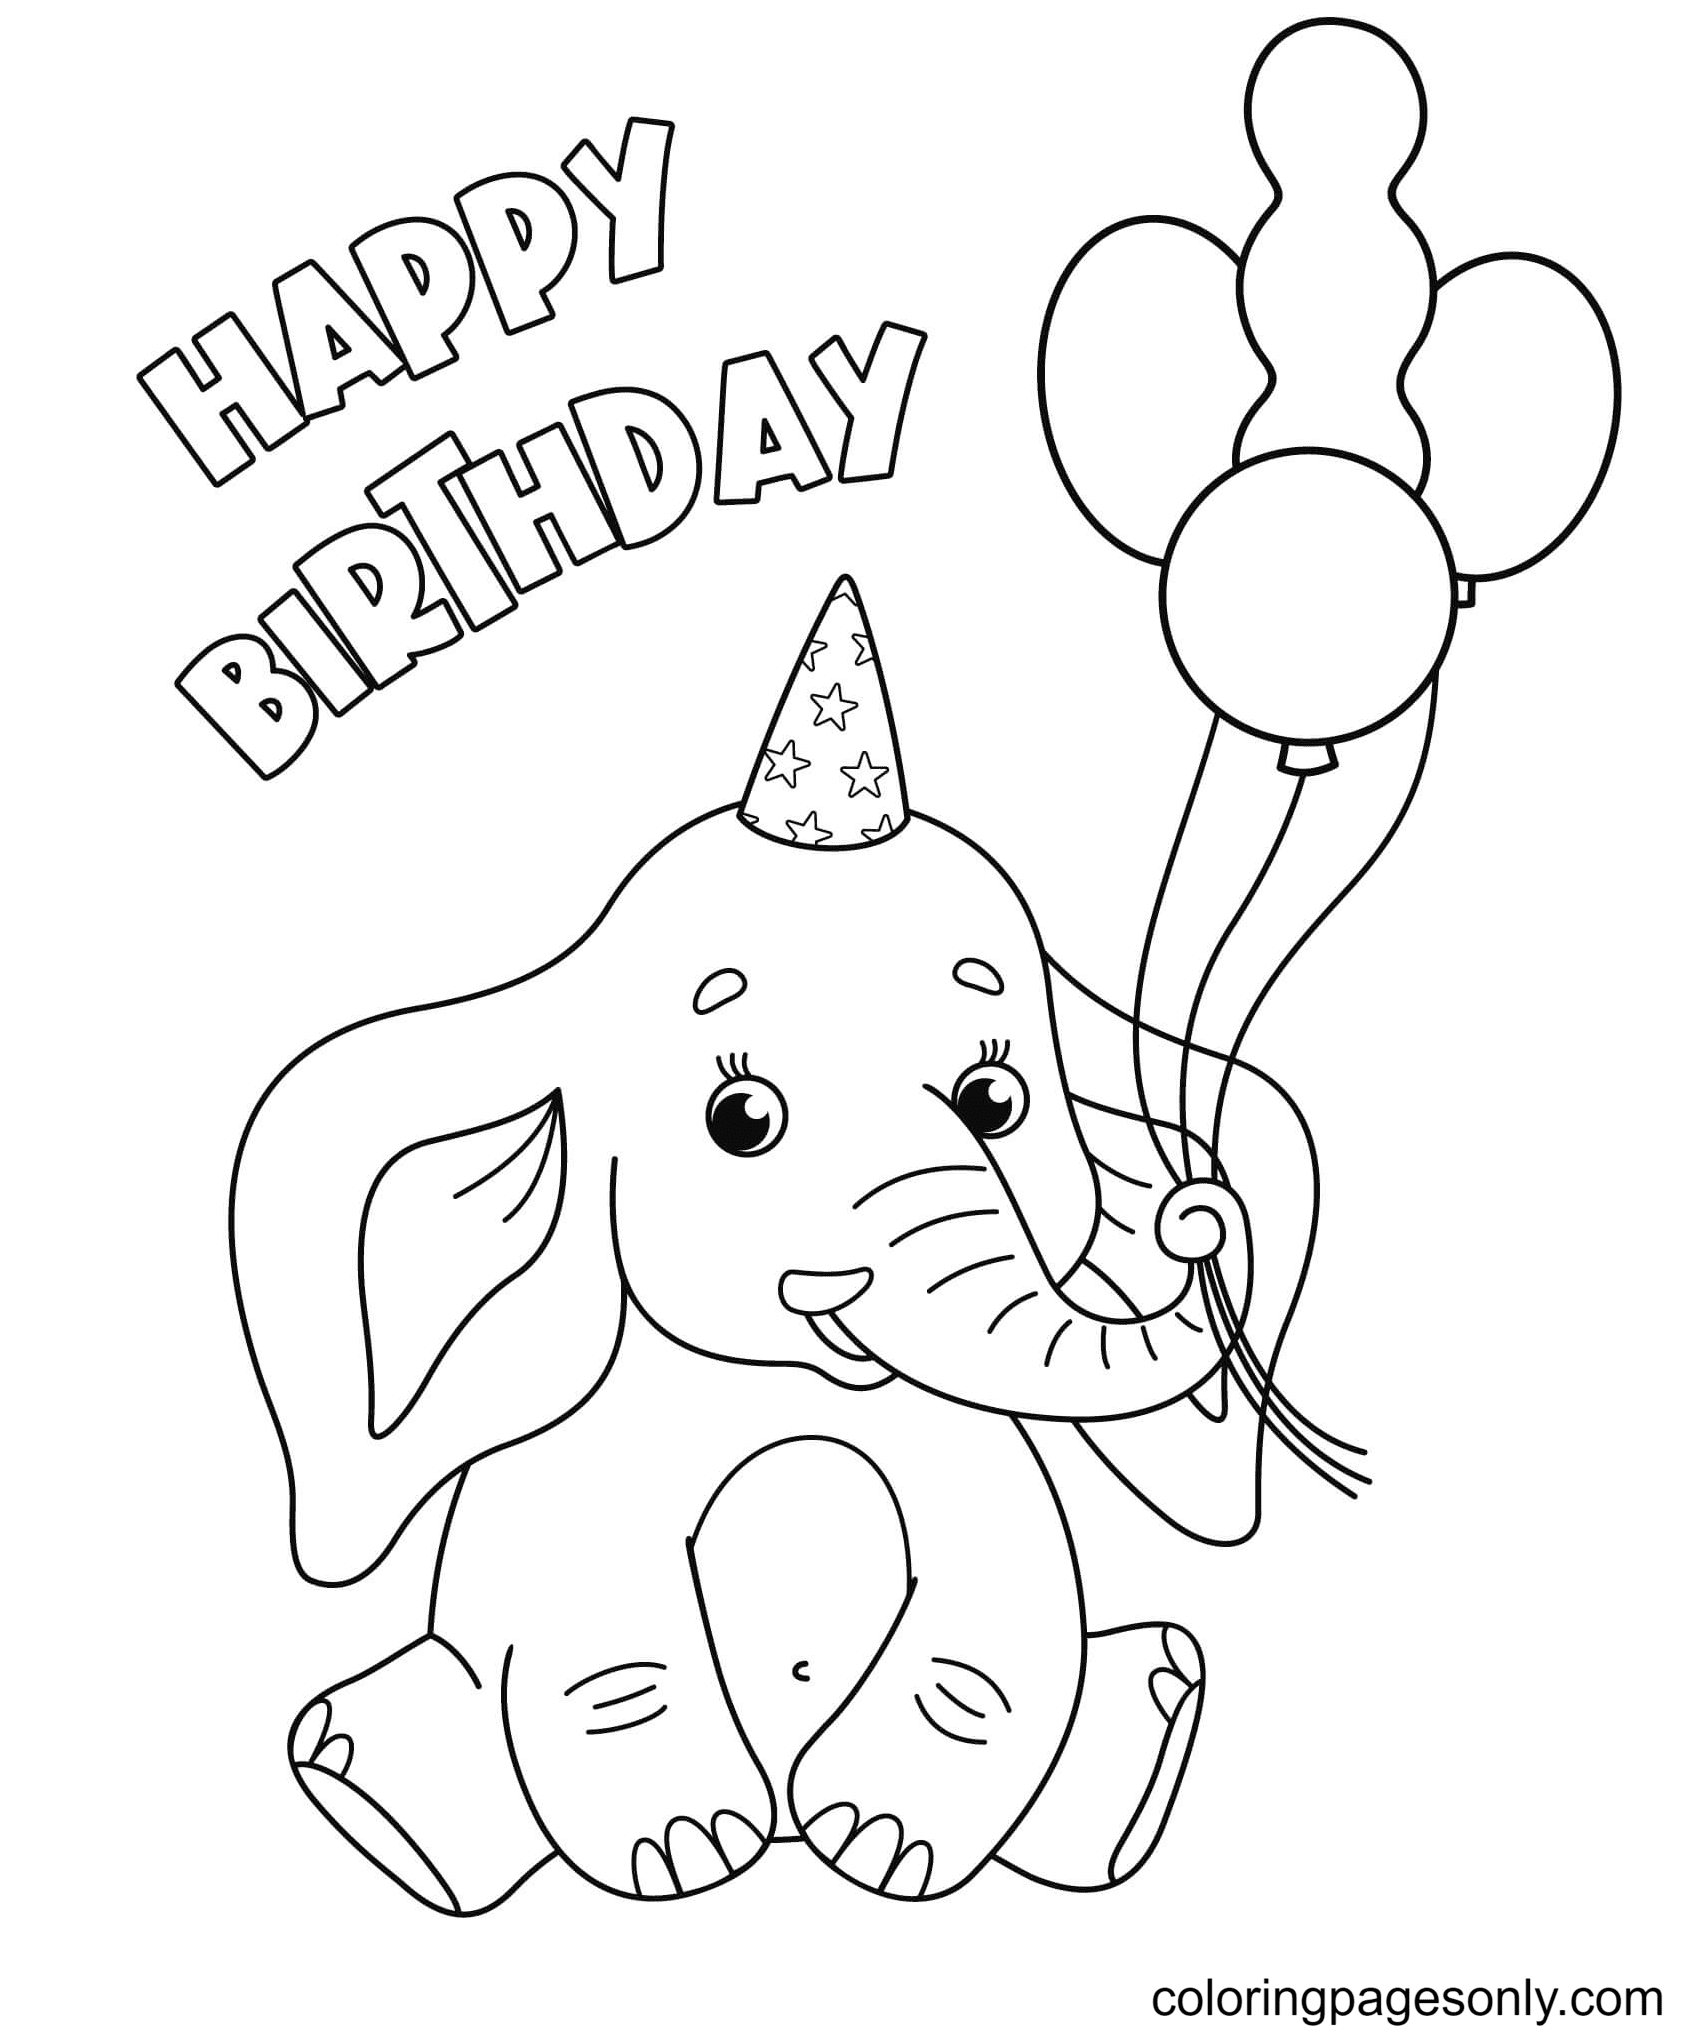 Happy Birthday With Elephant Coloring Pages